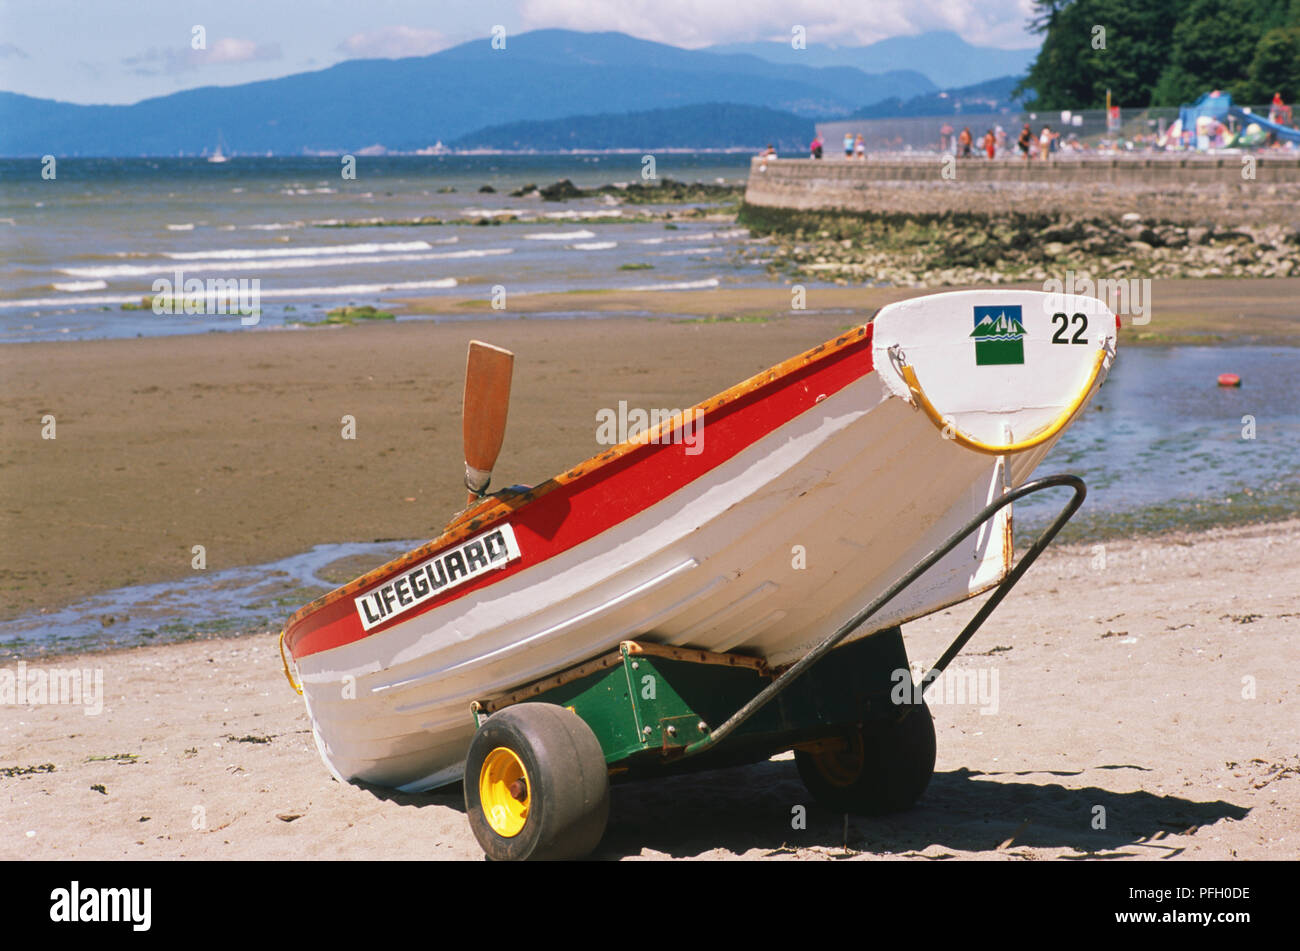 Canada, Pacific Northwest, British Columbia, Vancouver, Stanley Park, Second Beach, lifeguard boat attached to two-wheel trailer on beach. Stock Photo